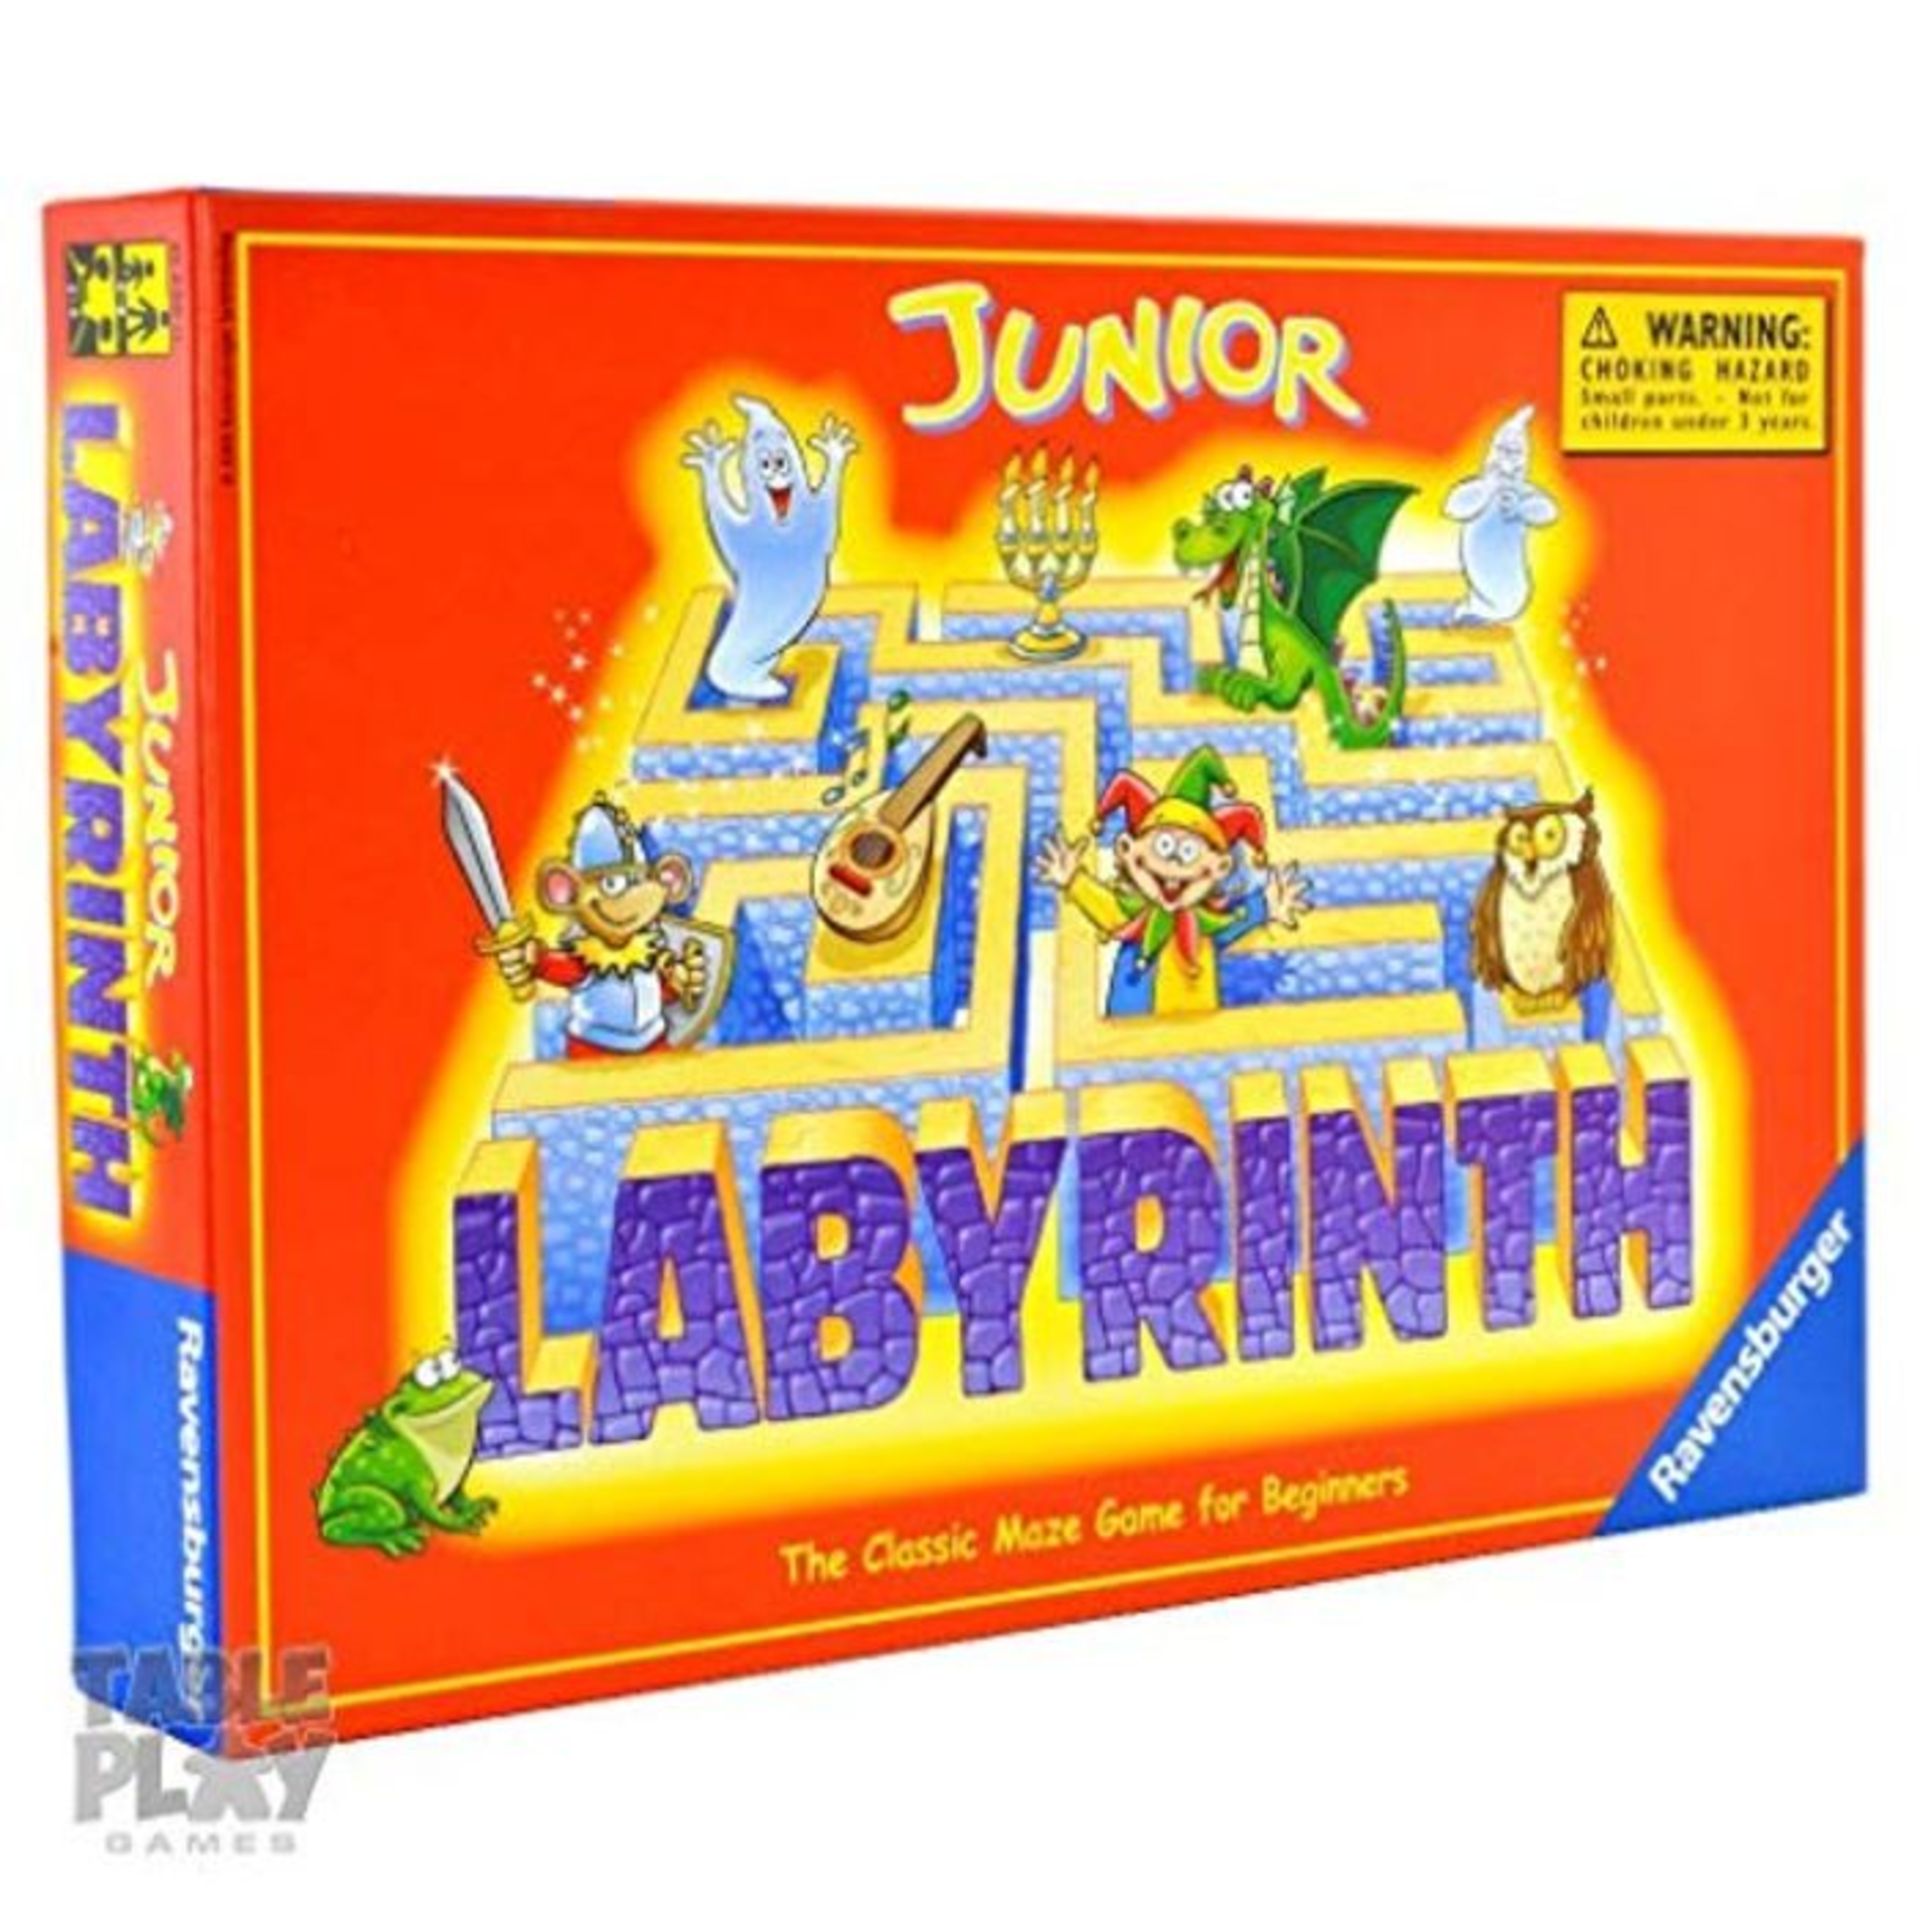 Ravensburger Labyrinth Junior - Moving Maze Game Family Board Game For Kids Age 4 and